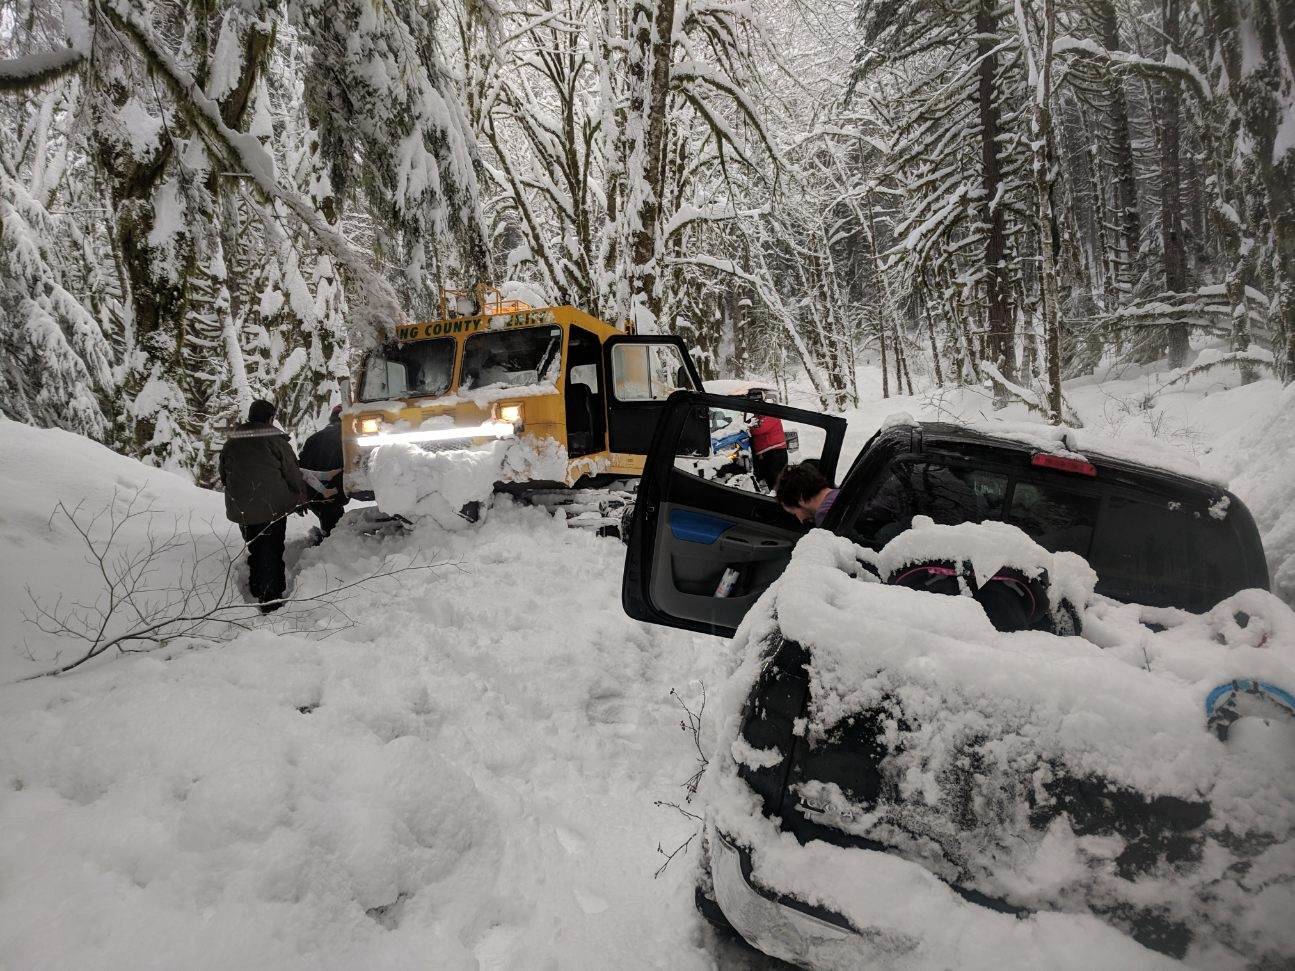 Four adults and 3-year-old child rescued around Dingford Creek Trail in North Bend